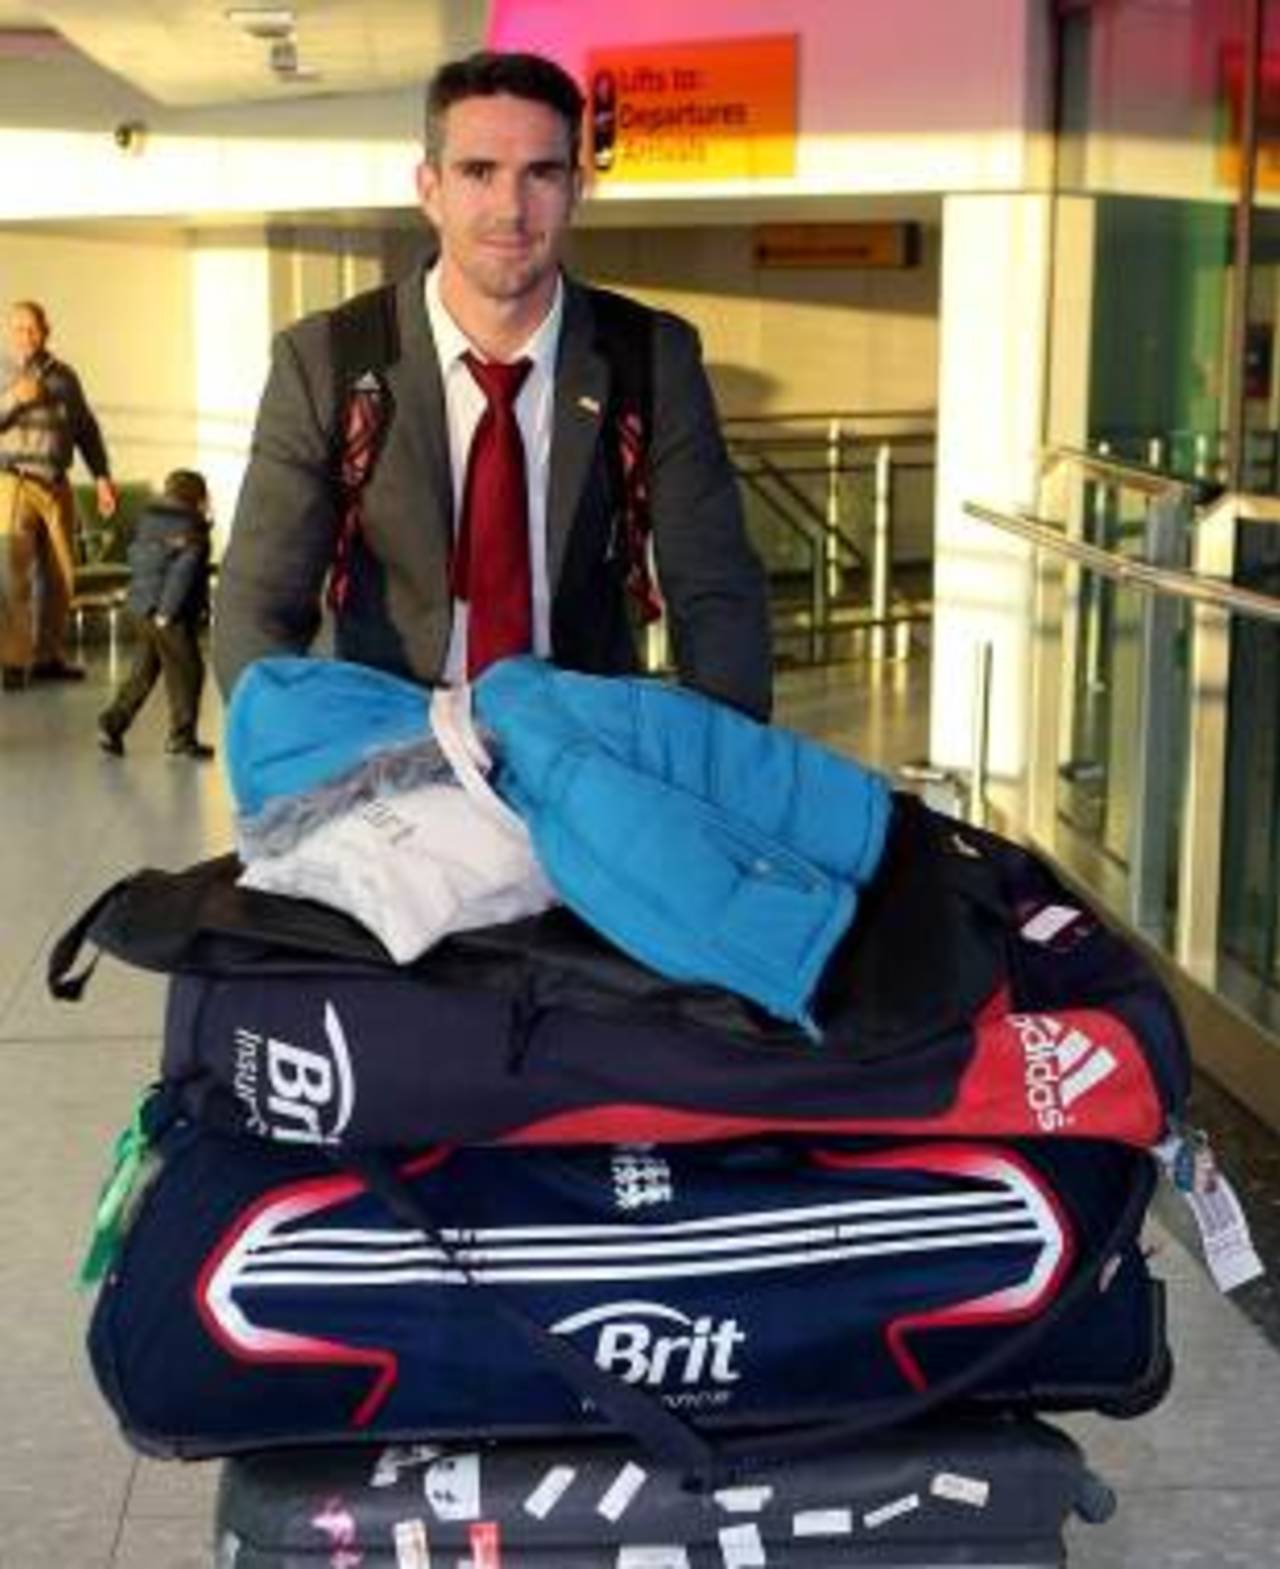 Kevin Pietersen arrives back at Heathrow Airport after England's series win in India, London, December 18, 2012